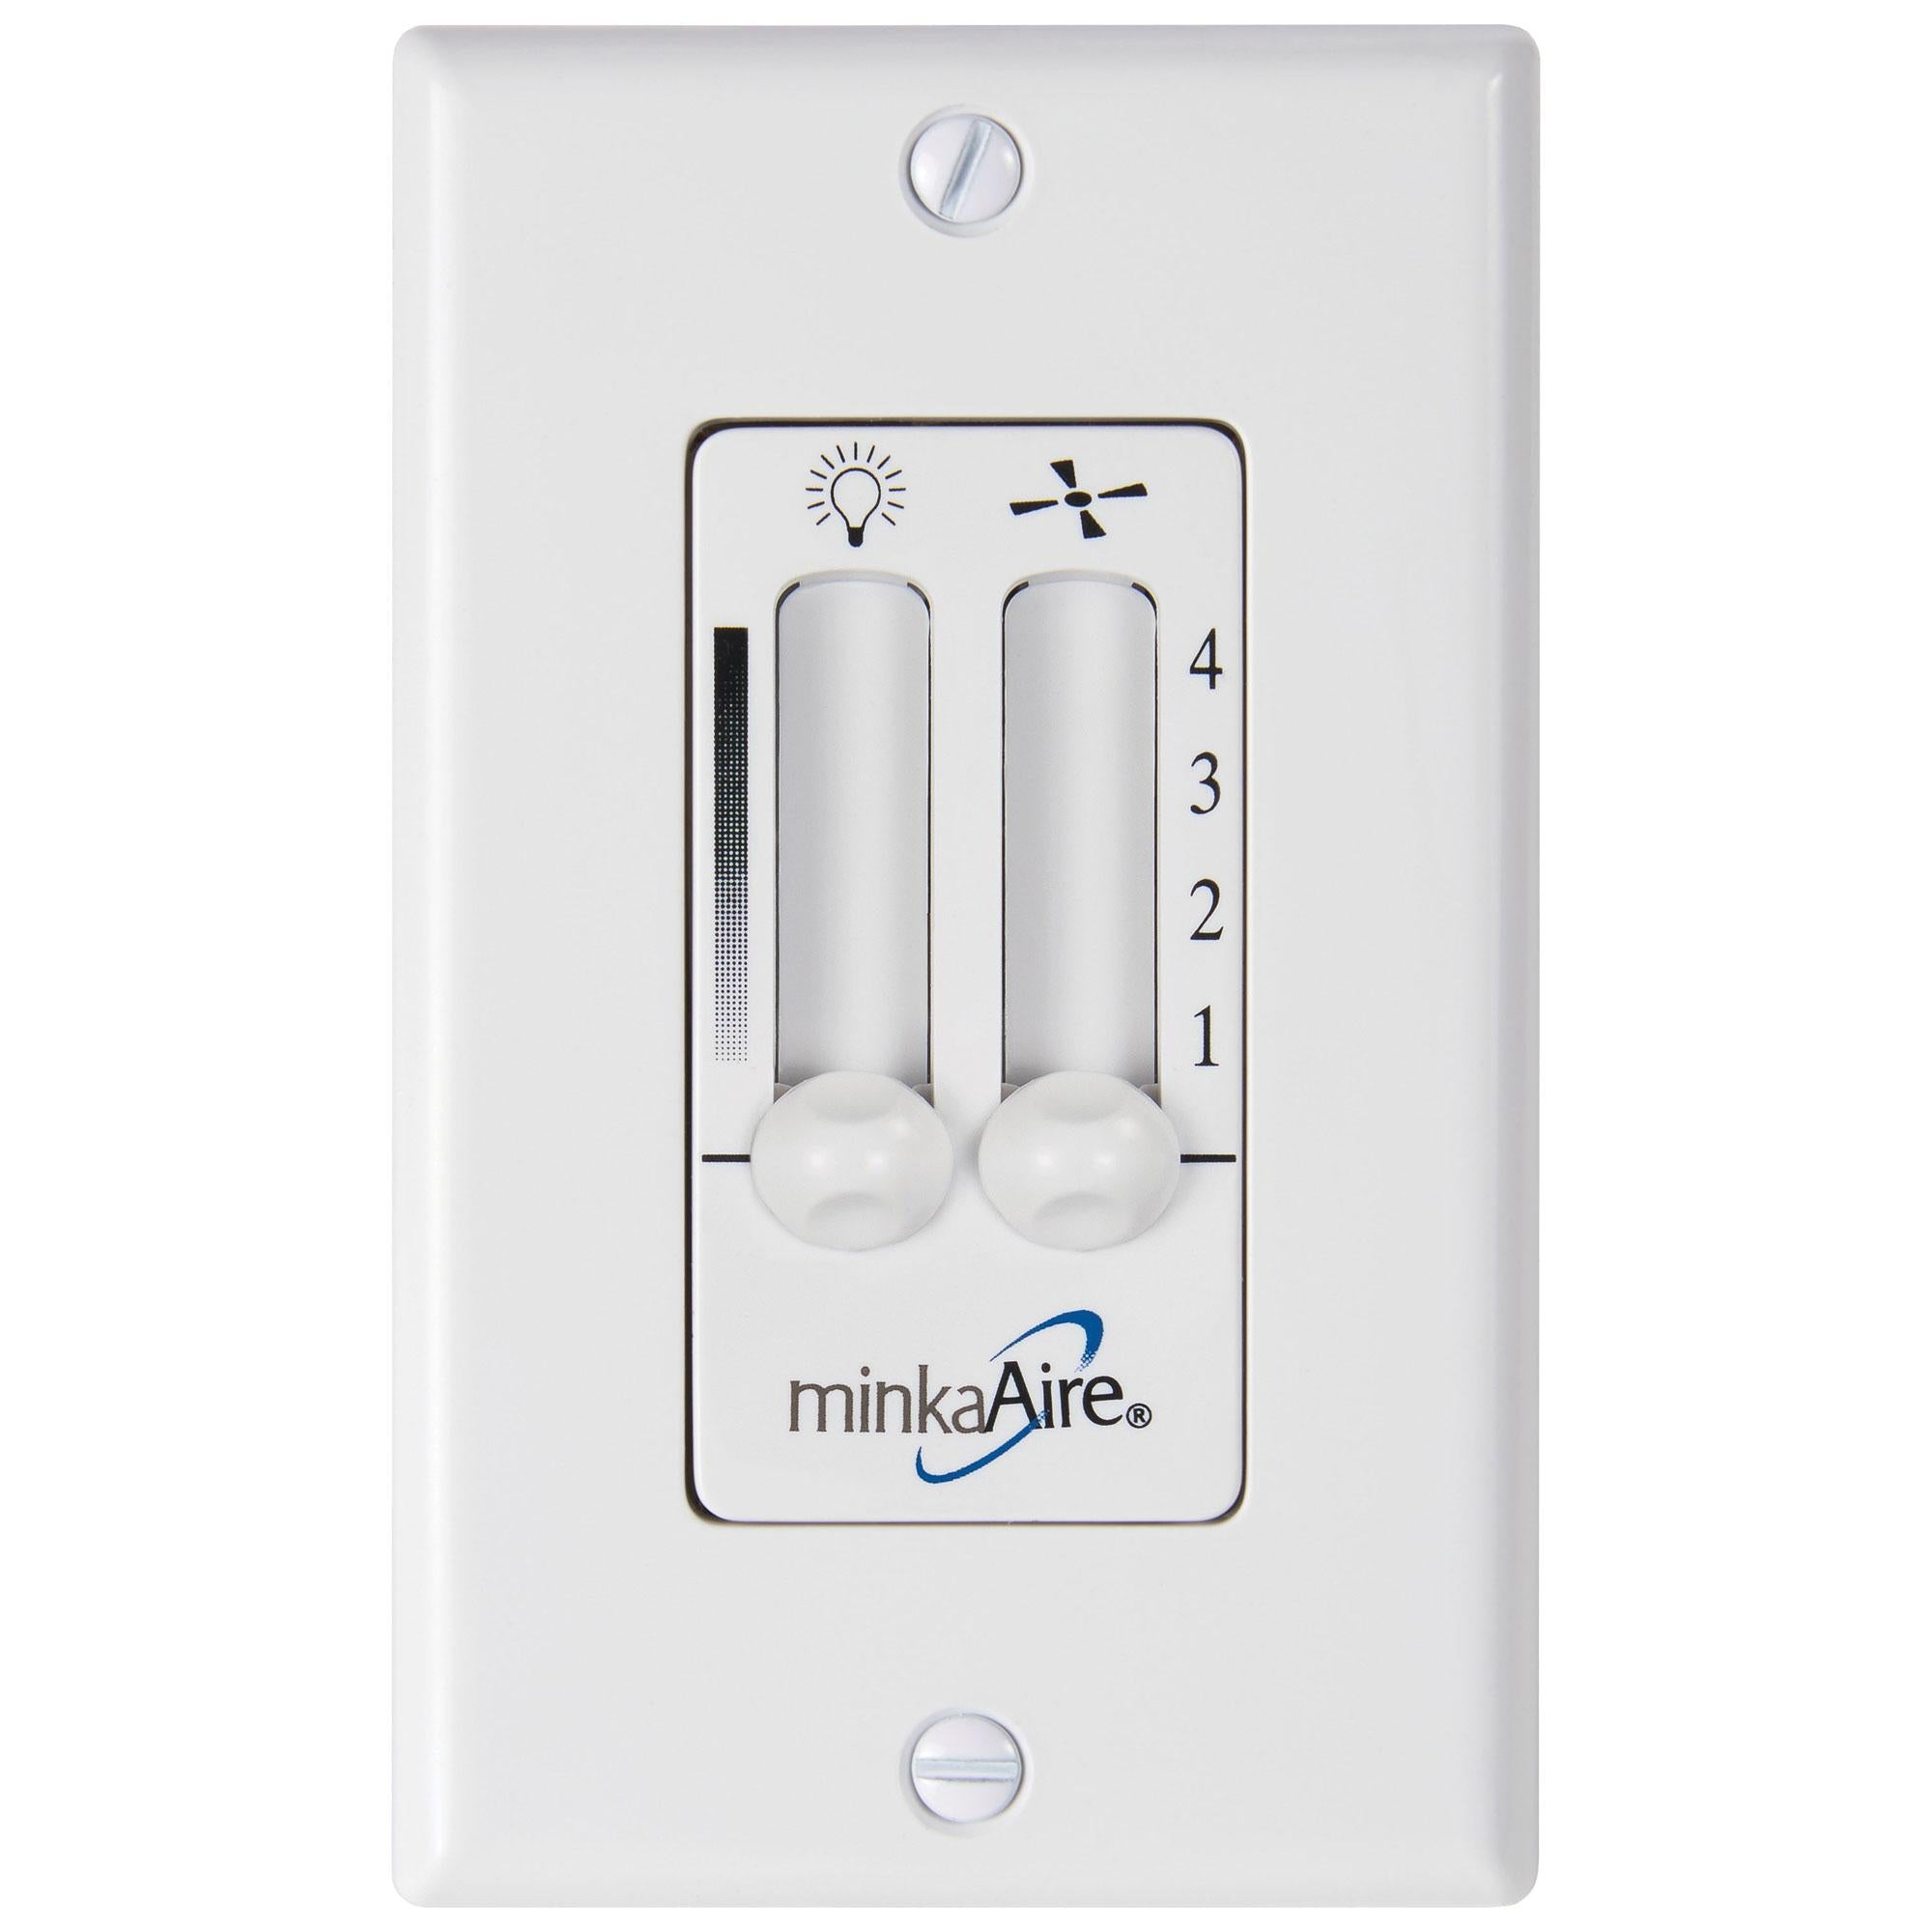 Spacesaver 4-Speed Ceiling Fan And Light Wall Control, White Finish